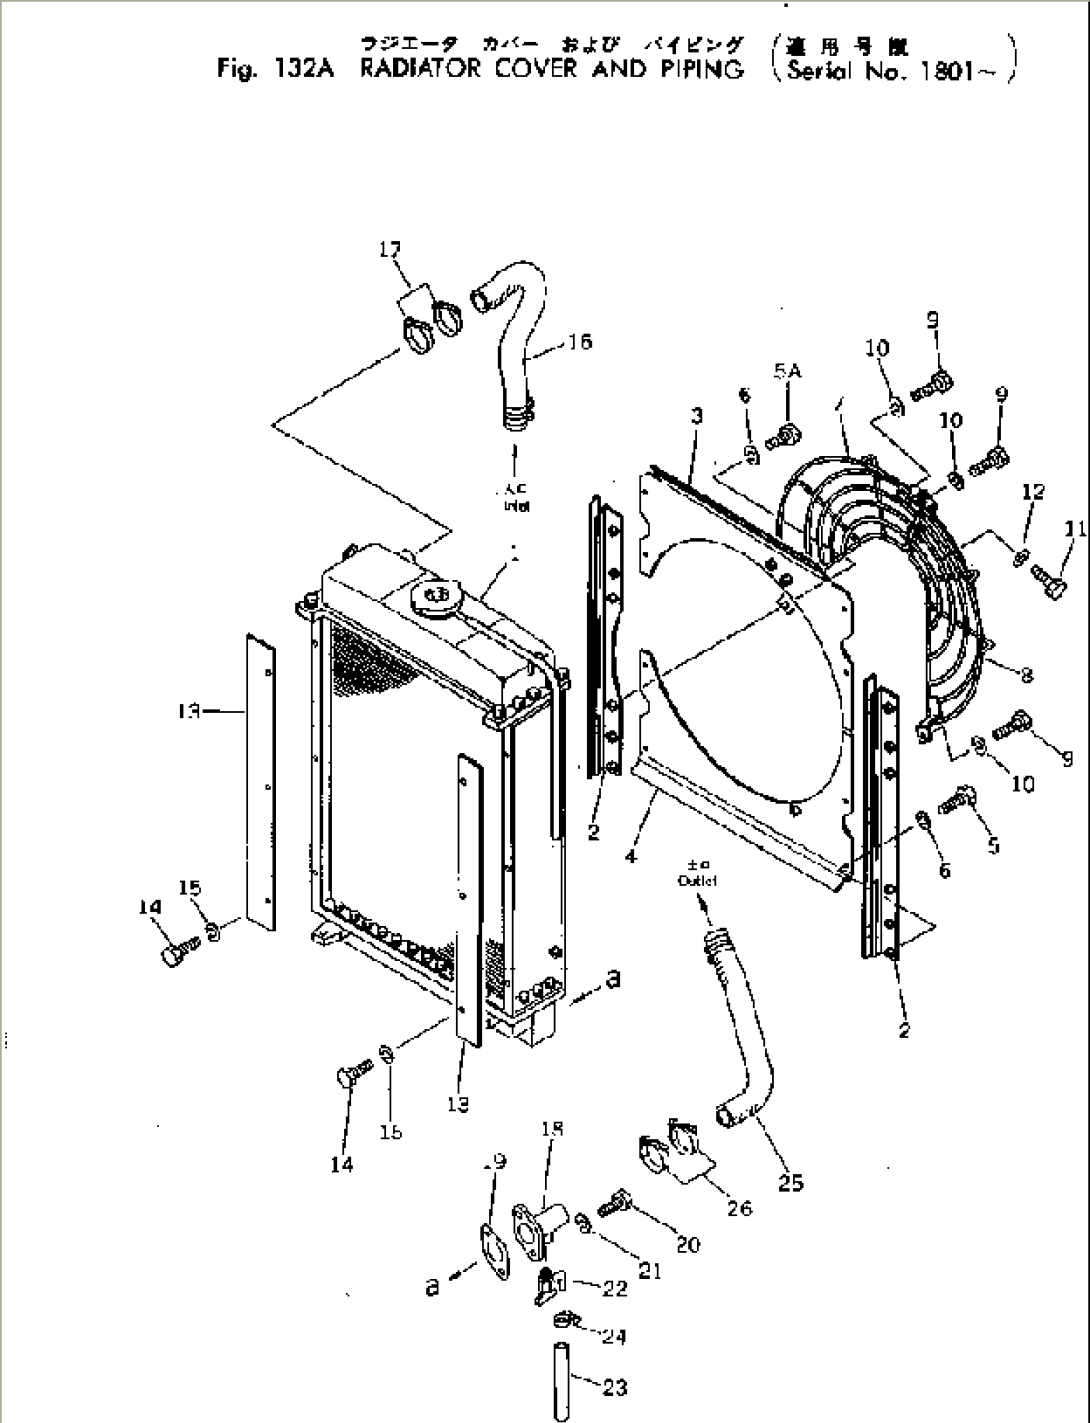 RADIATOR COVER AND PIPING(#1801-)